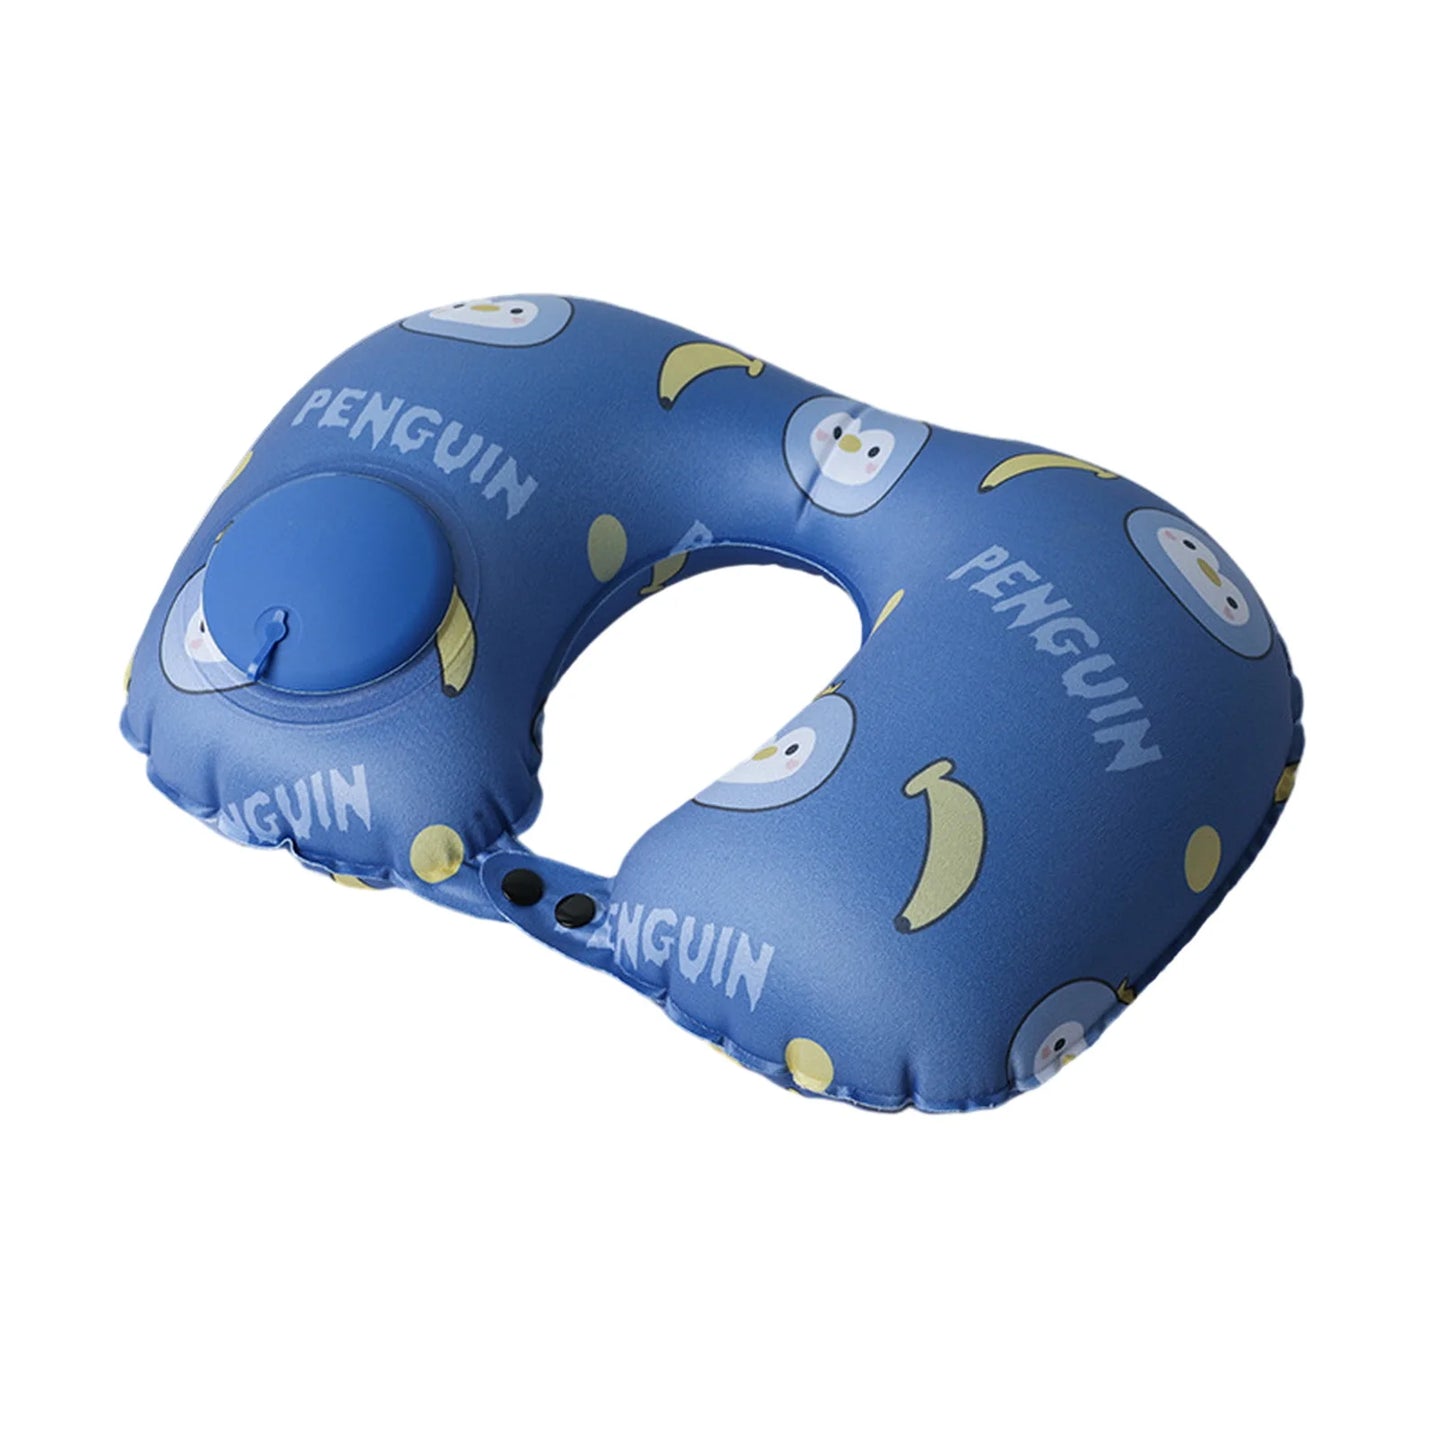 A product image of the penguin Press-Inflatable_Neck_Pillow